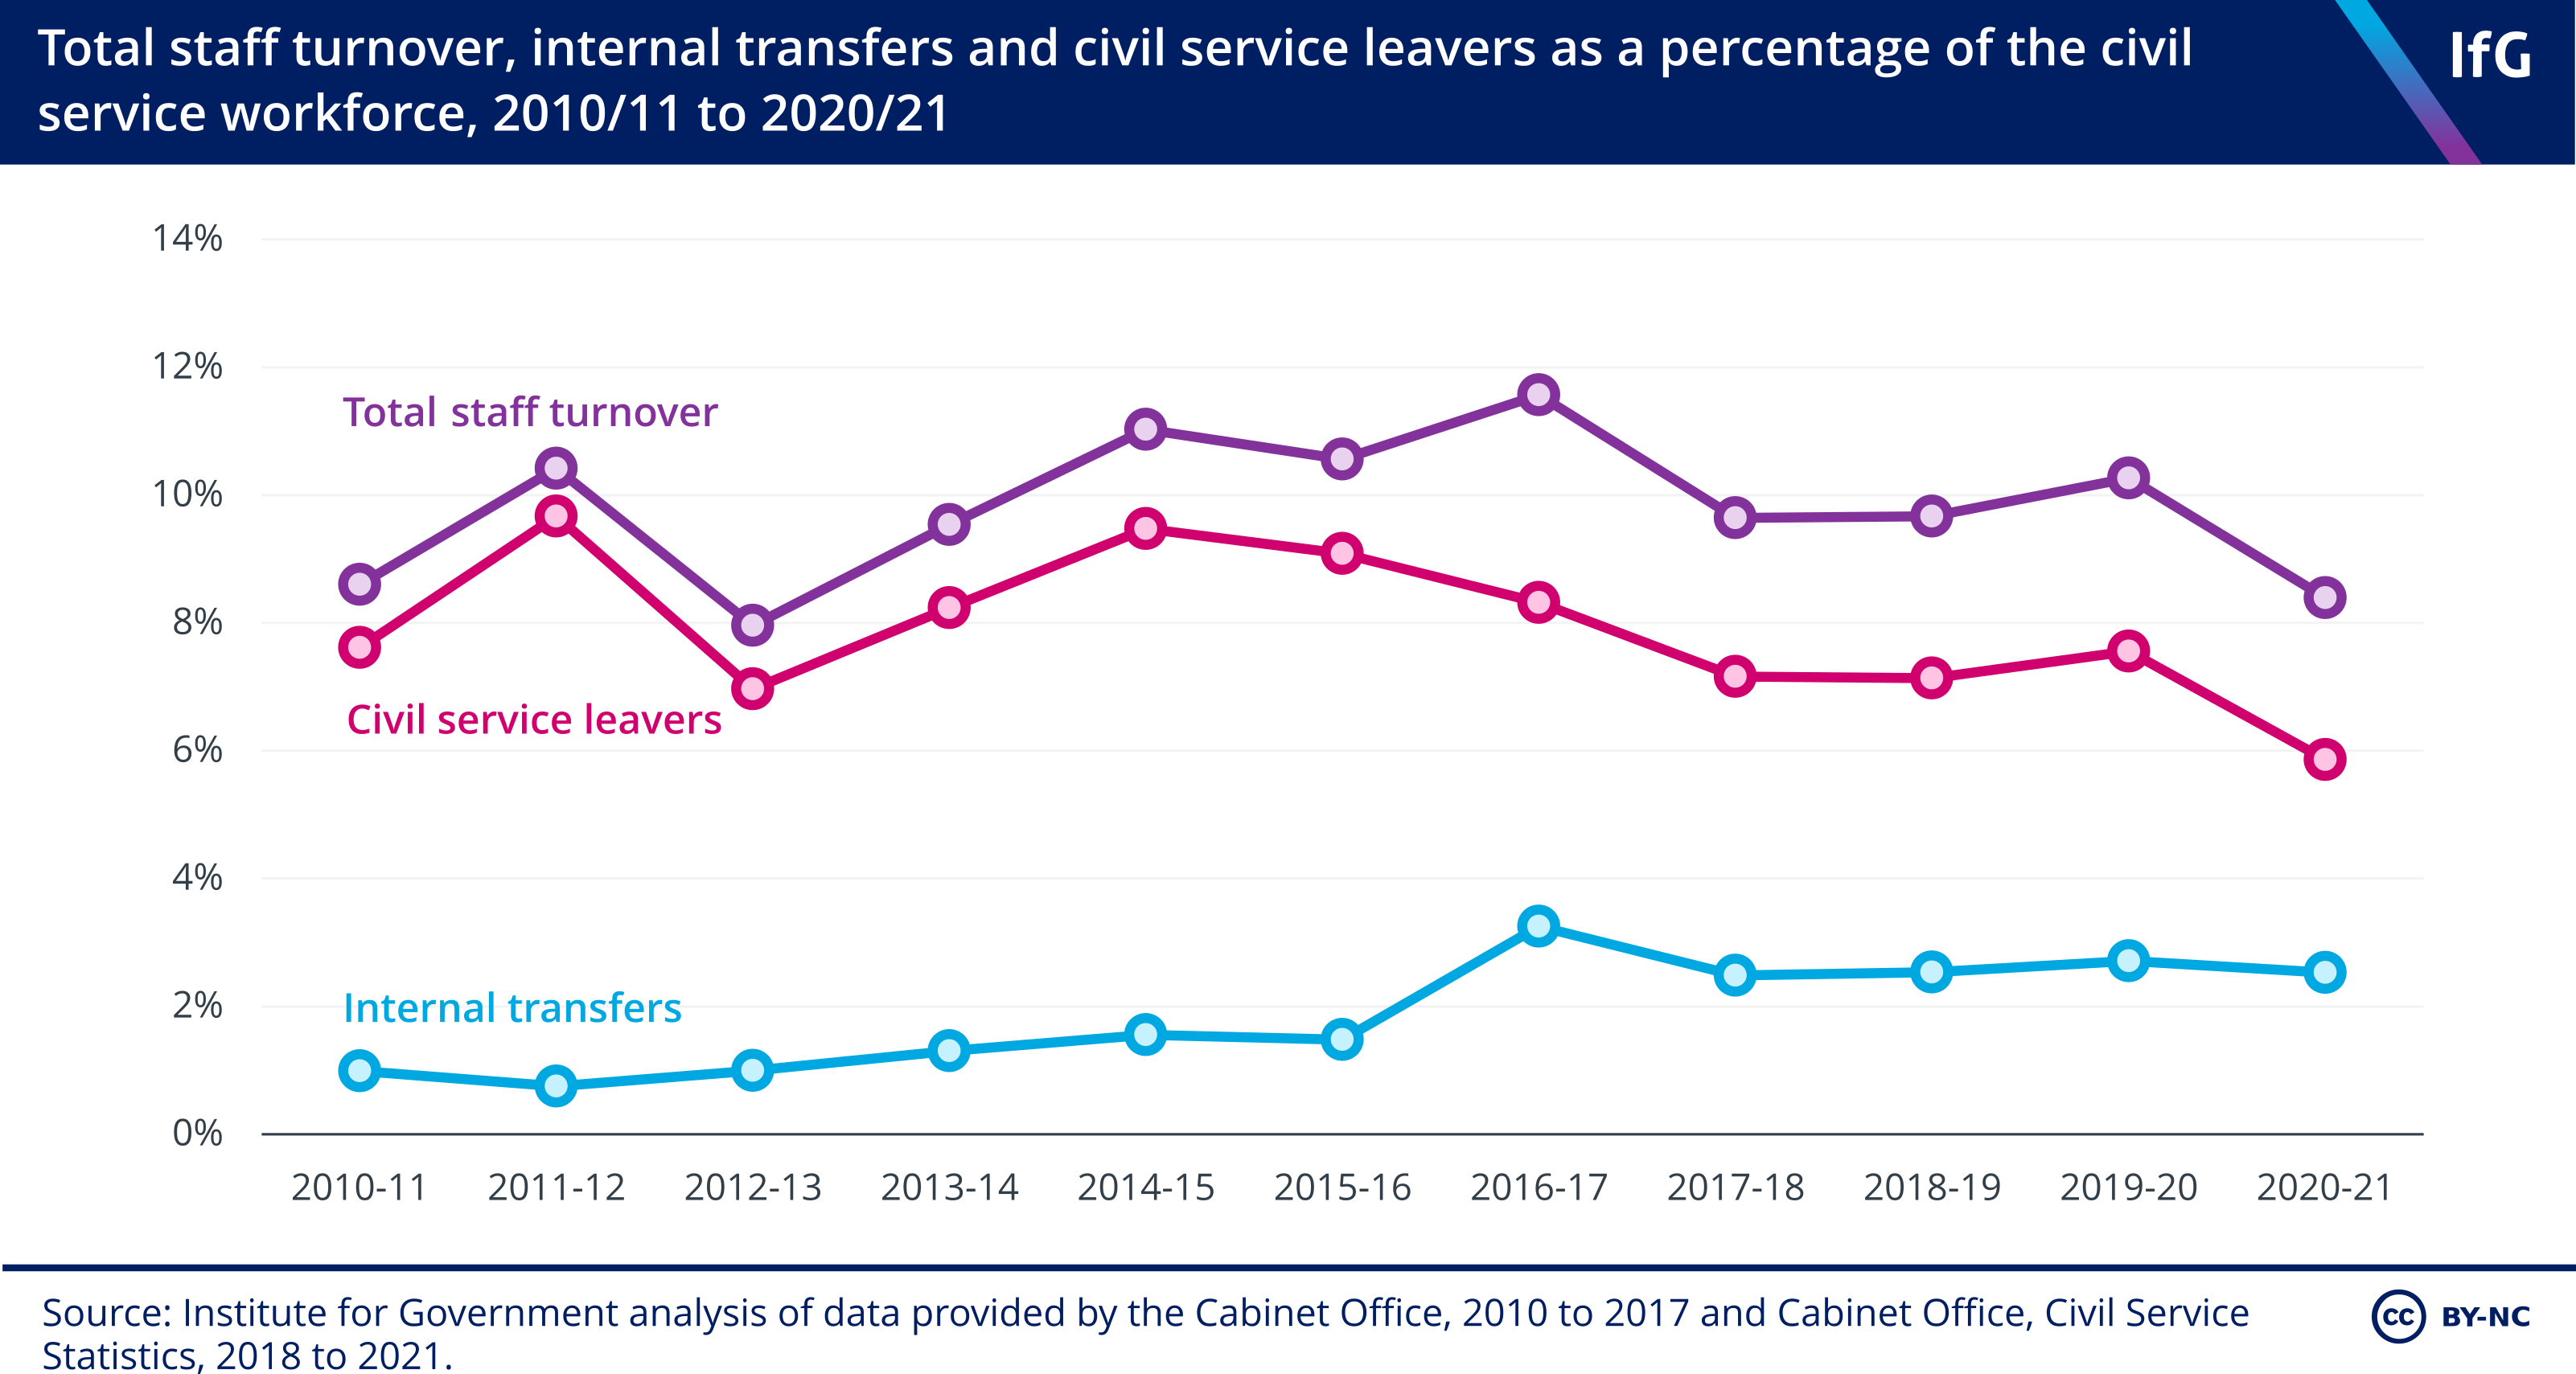 Total turnover, civil service leavers and internal transfers as a percentage of the civil service workforce